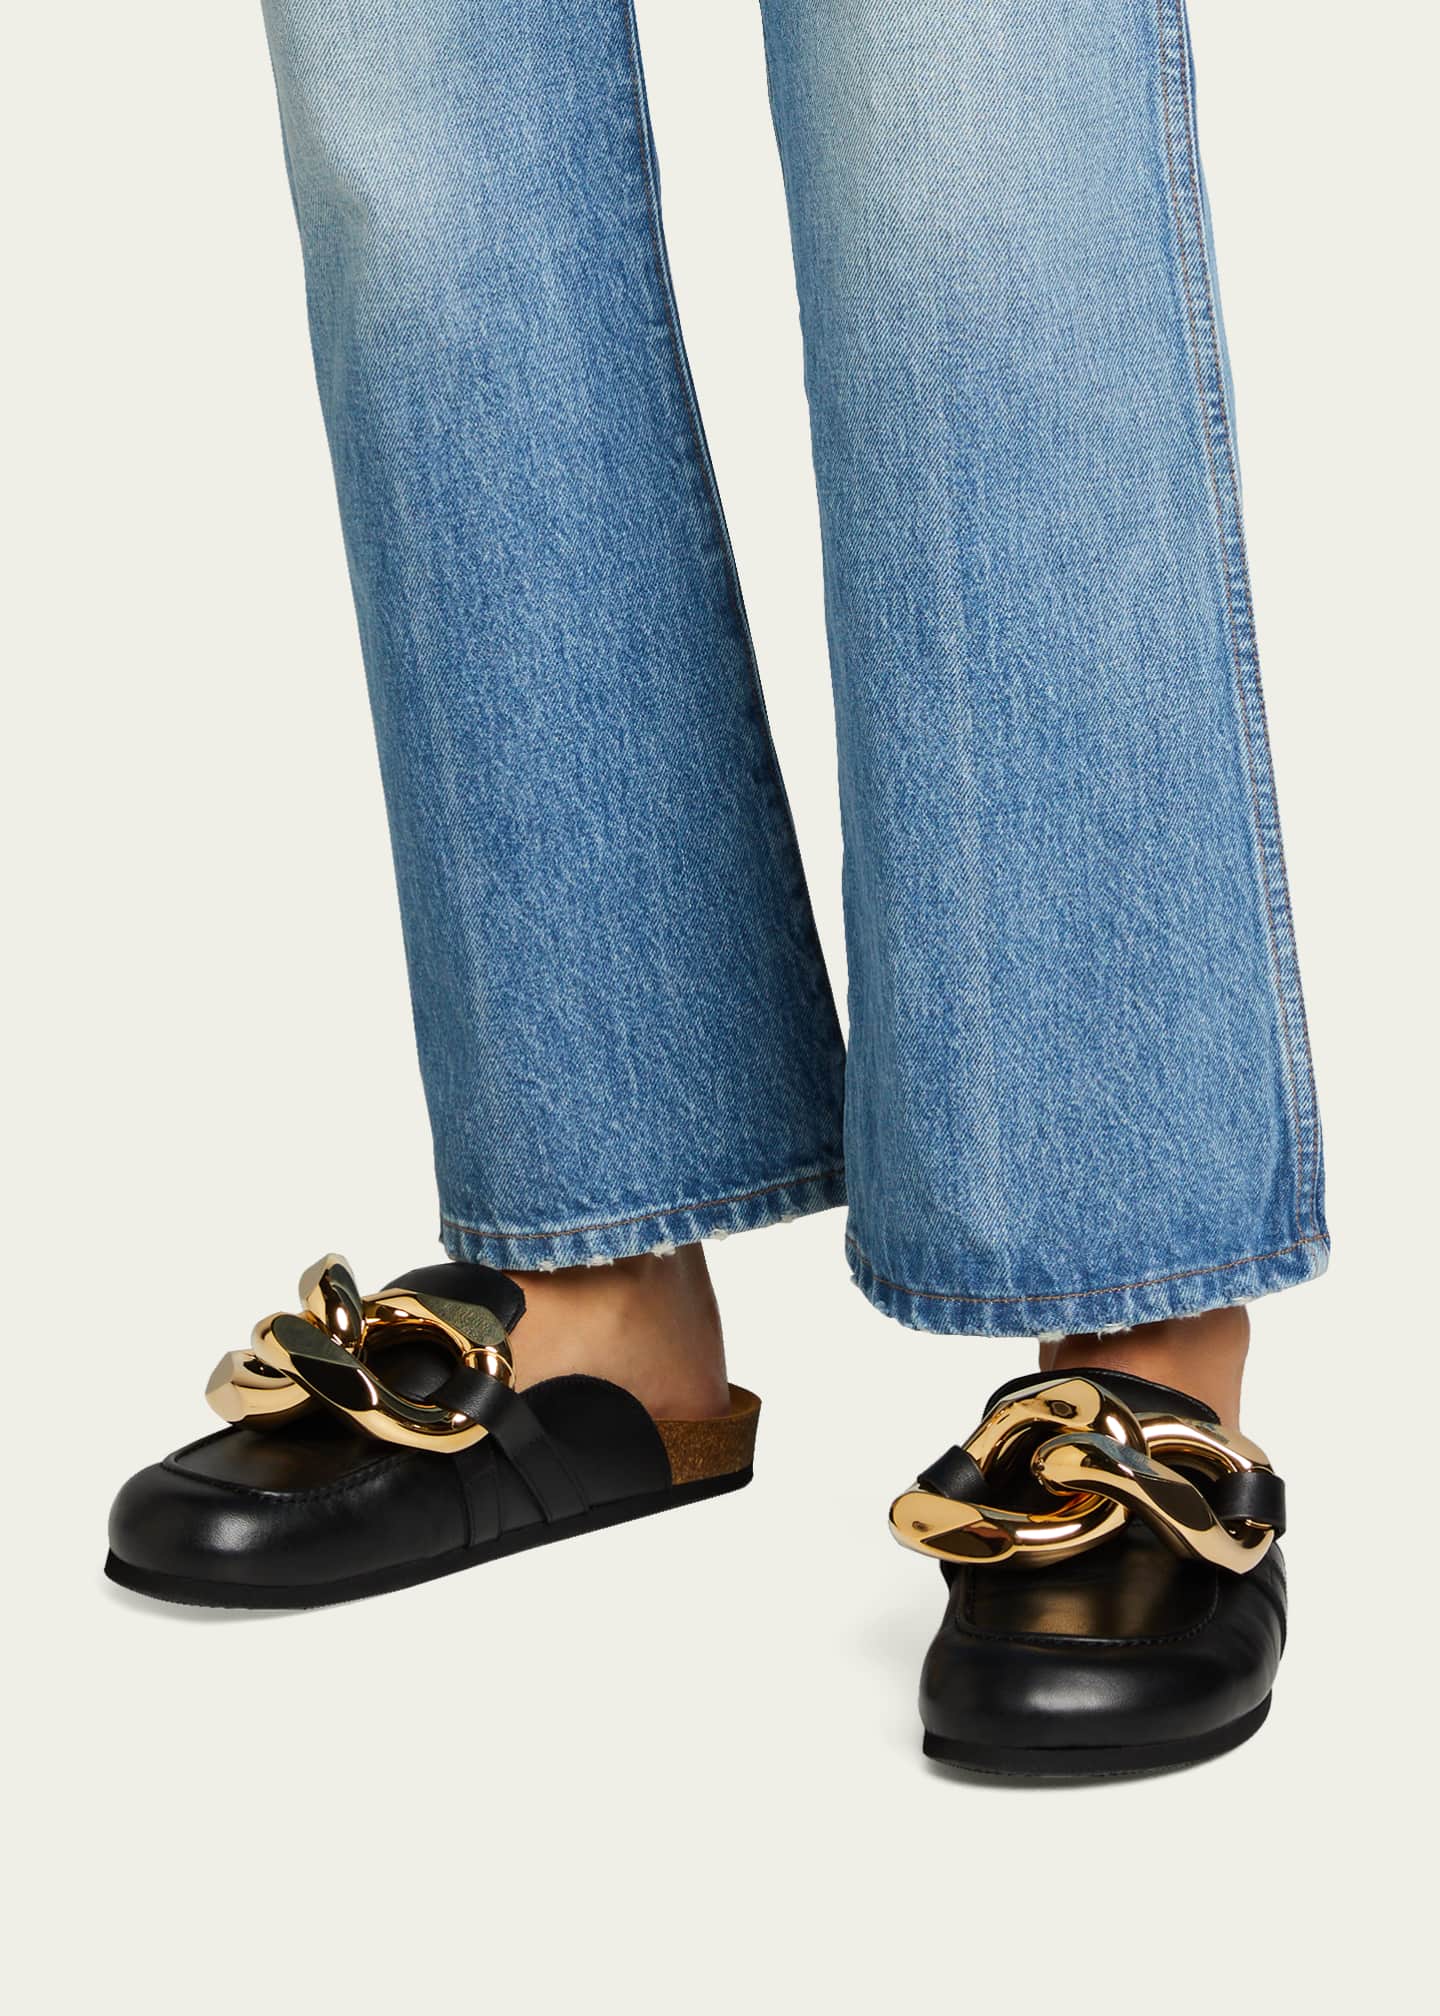 JW Anderson Chunky Napa Chain Slide Mules Image 2 of 5